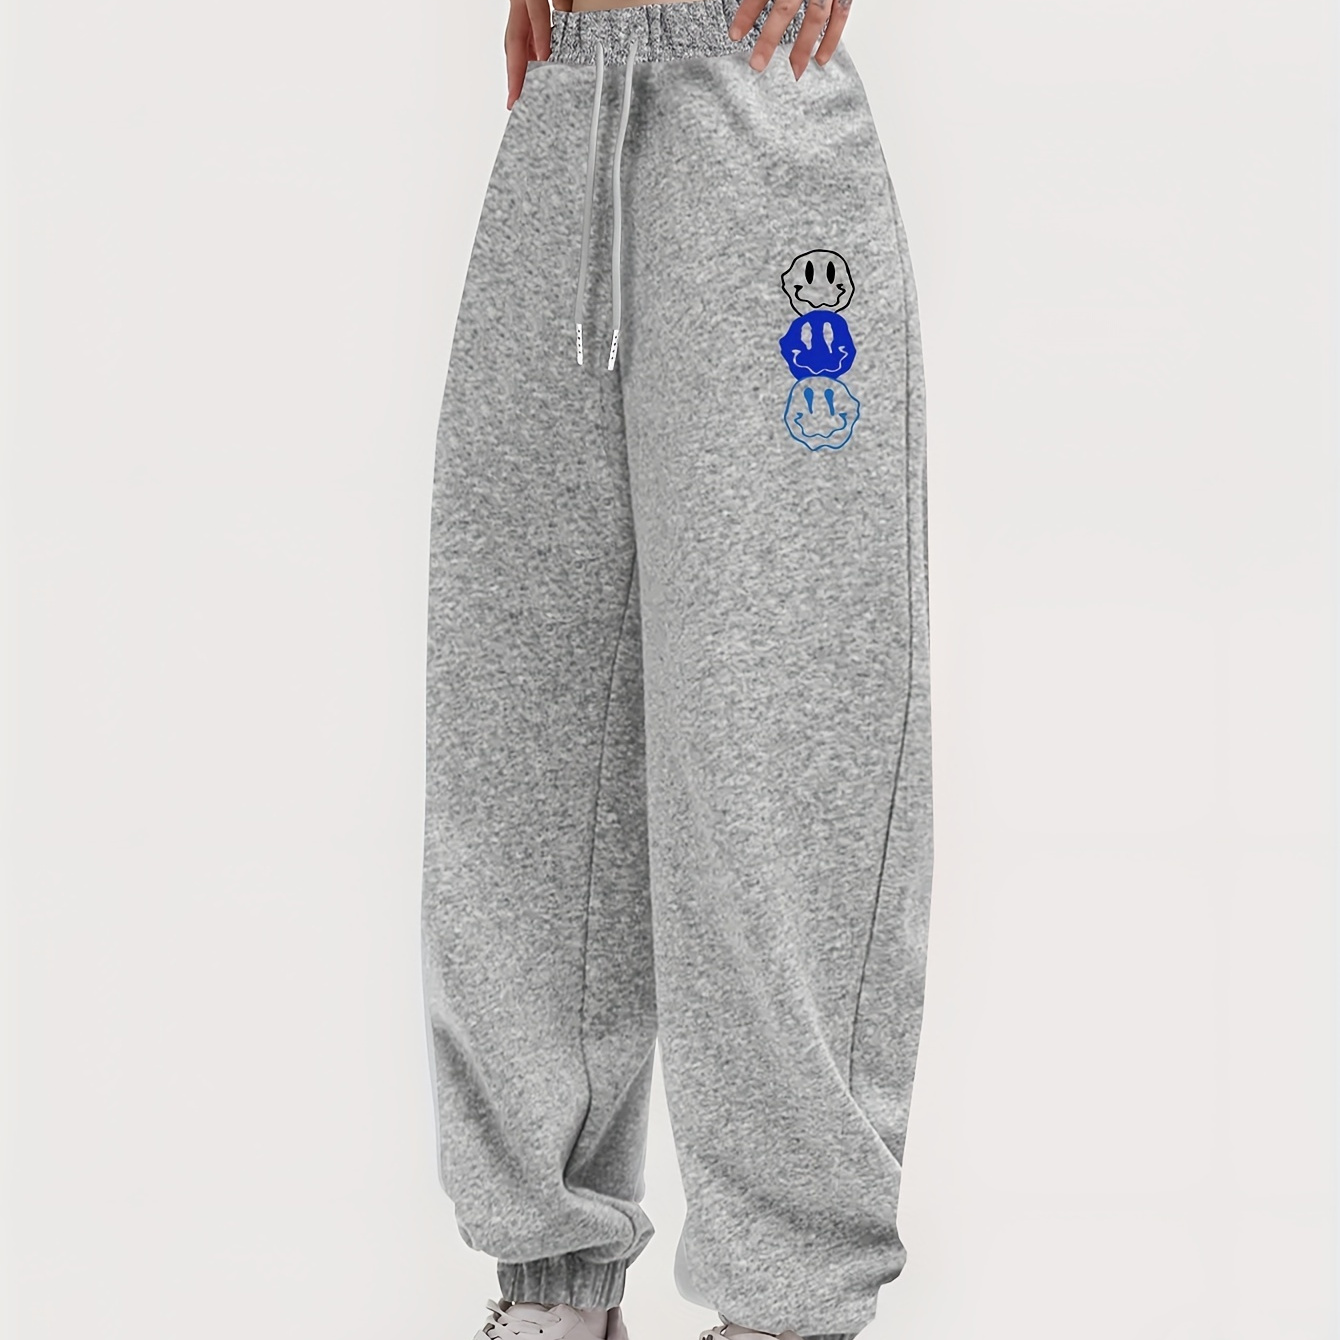 

Funny Smile Face Print Drawstring Sweatpants, Fashionable And Versatile Elastic Casual Sports Pants, Women's Athleisure